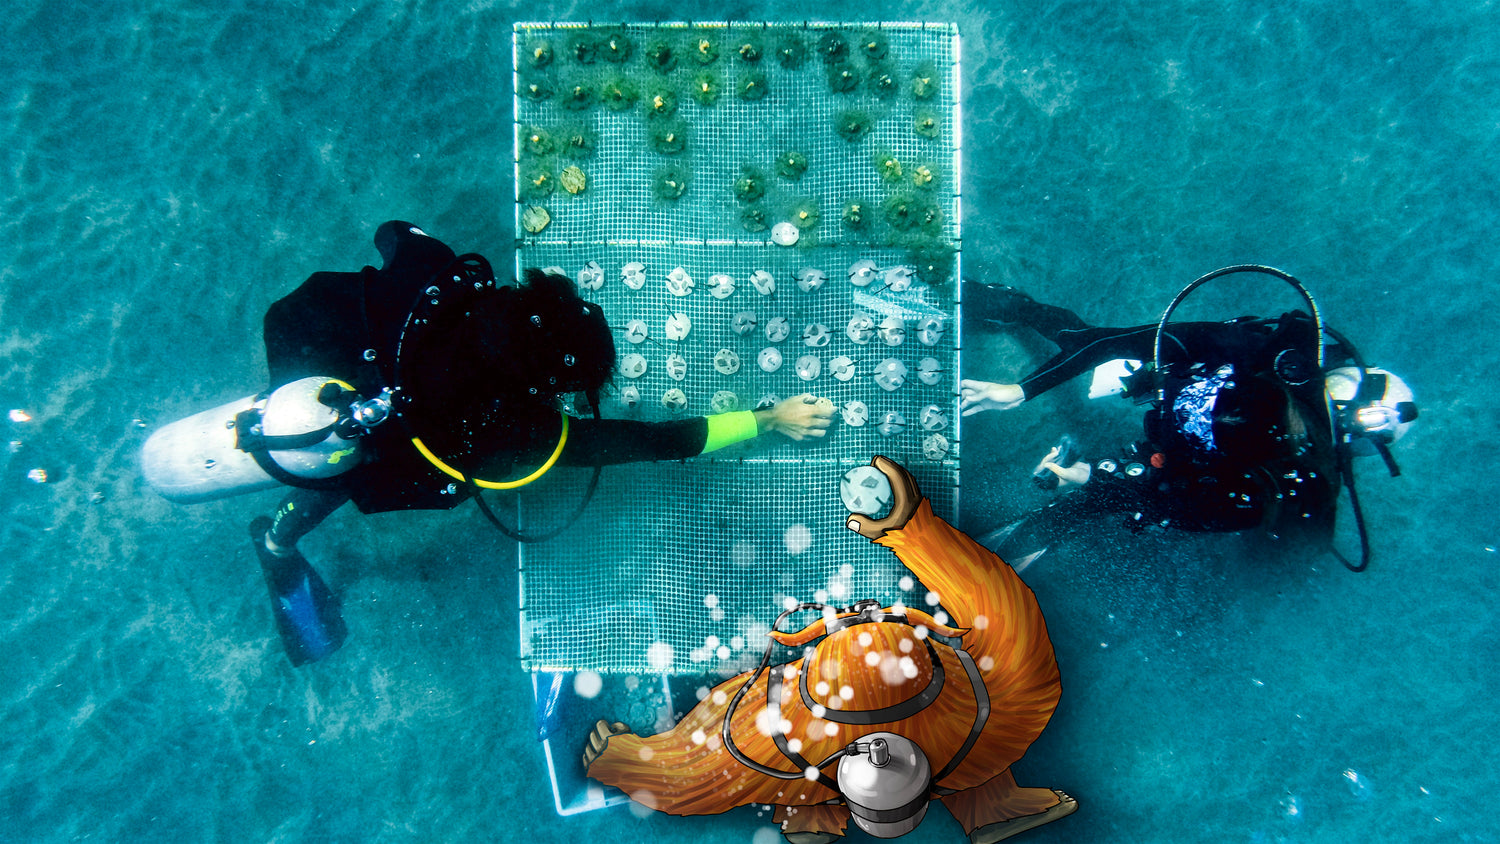 Underwater photo of two divers working on coral reef restoration grid with an illustrated orange sasquatch helping, symbolizing the brand's partner's conservation efforts.